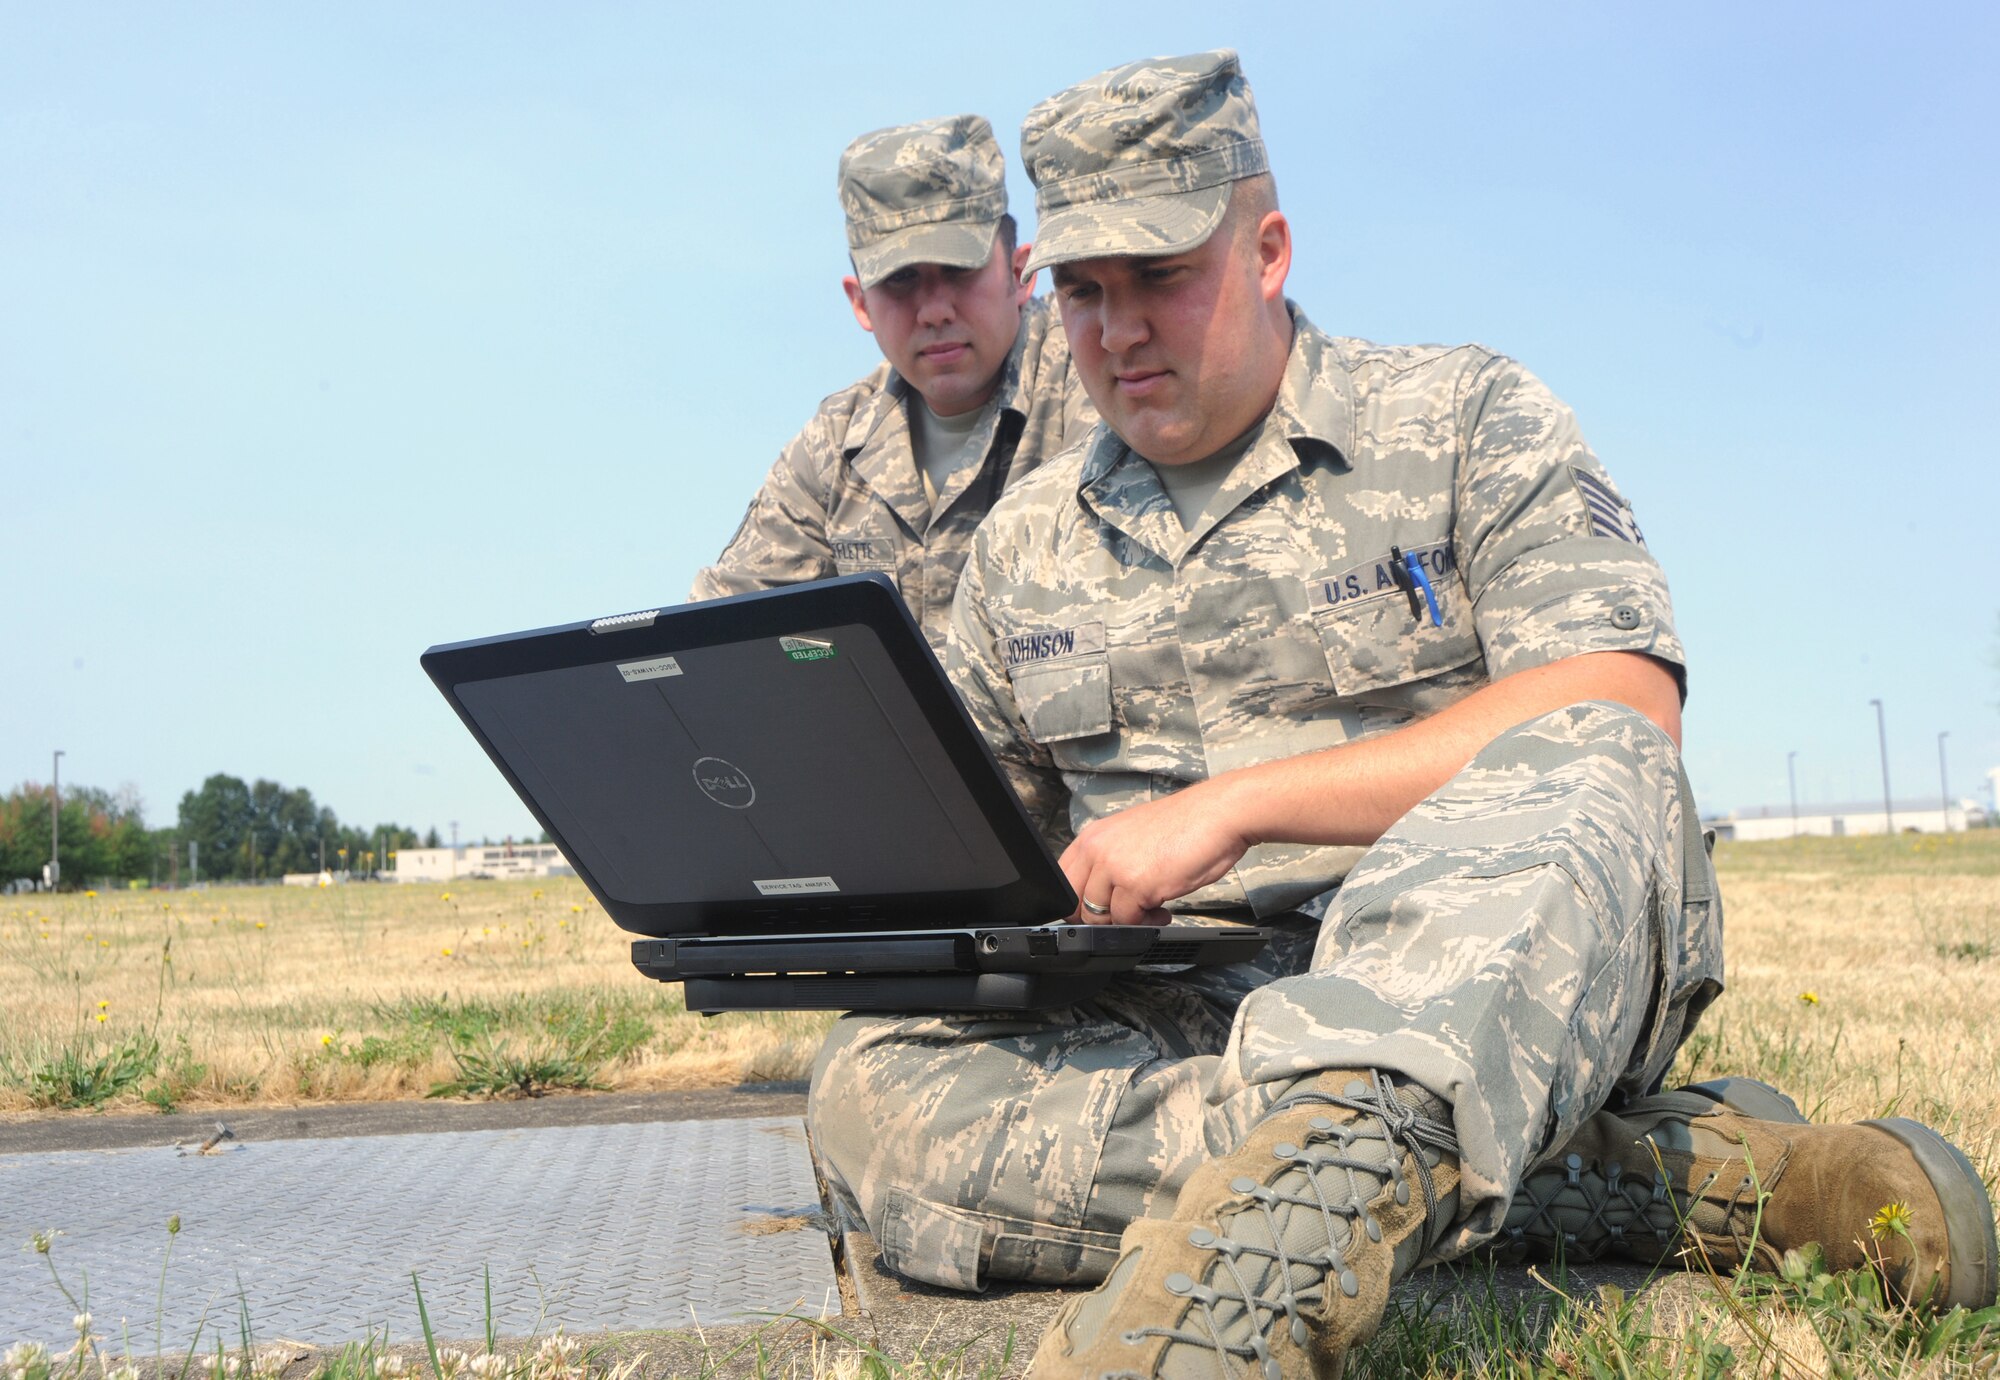 Oregon Airmen leverage technology to complete training and mission during pandemic